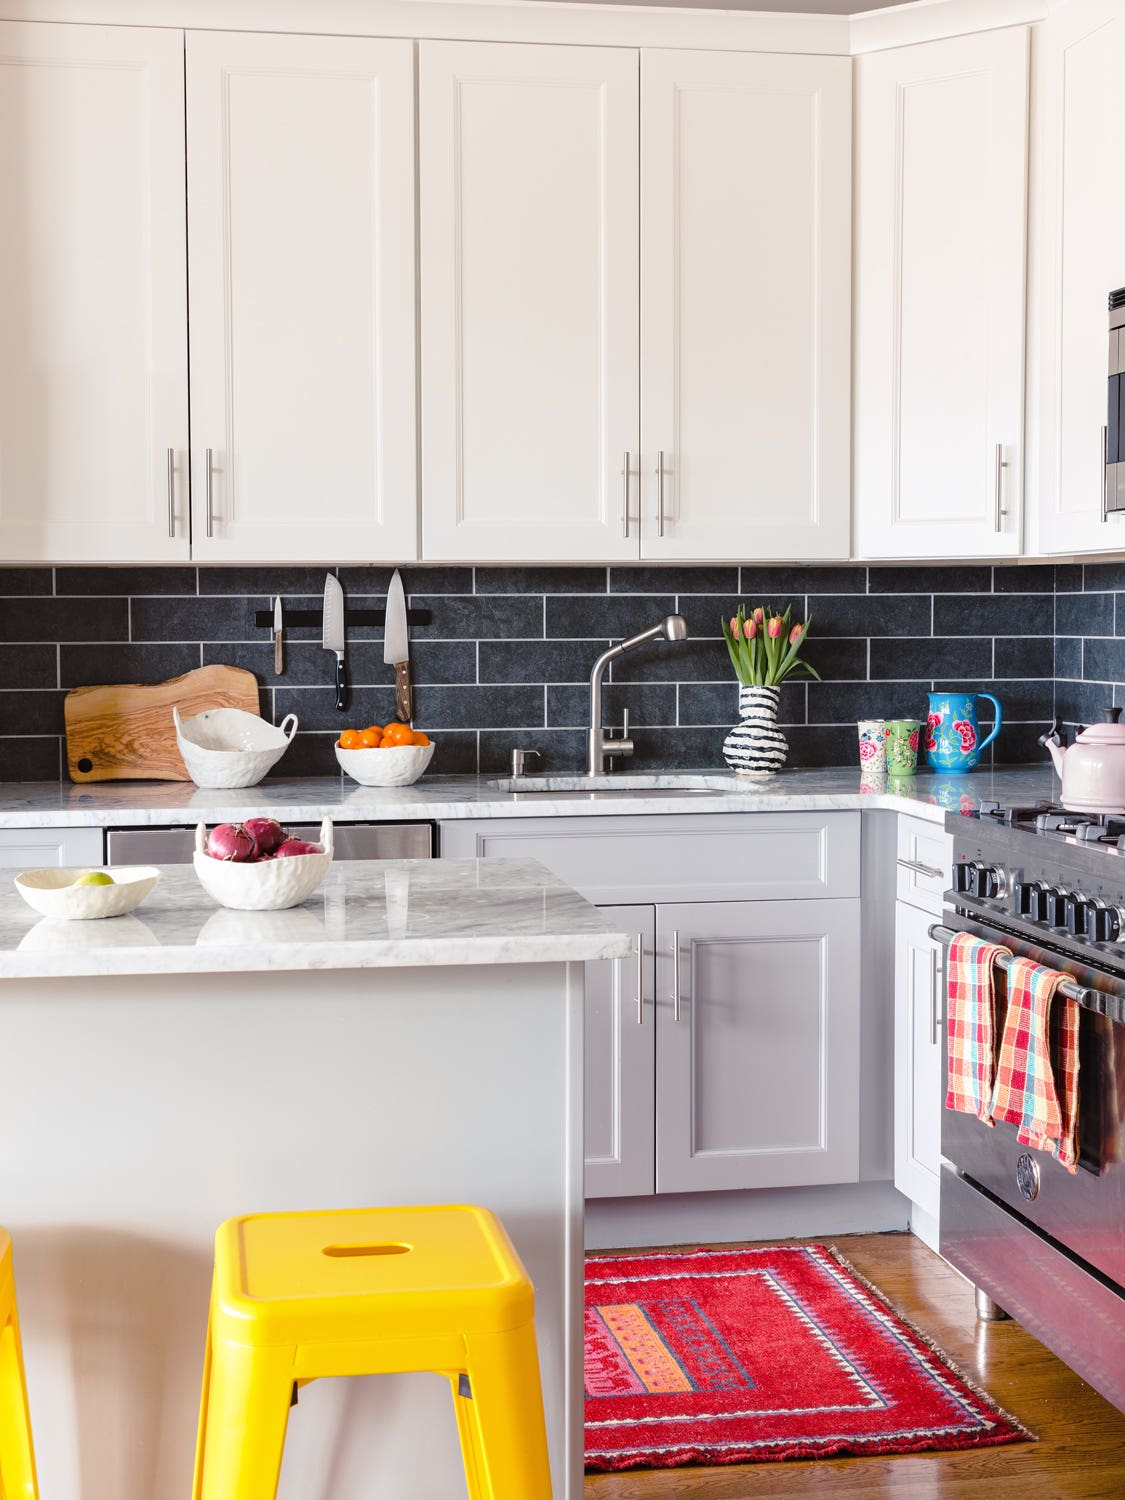 This Is the Most-Searched Kitchen Gadget in the U.S.